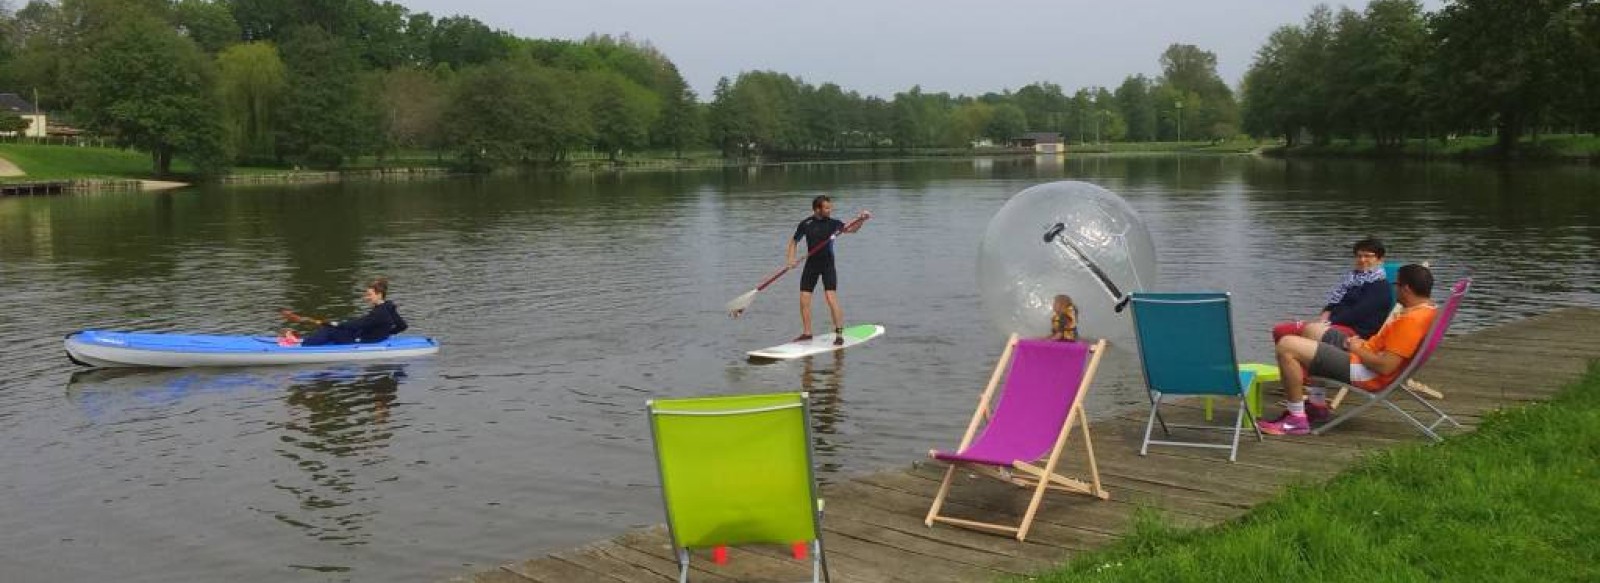 LOCATION DE STAND-UP PADDLE